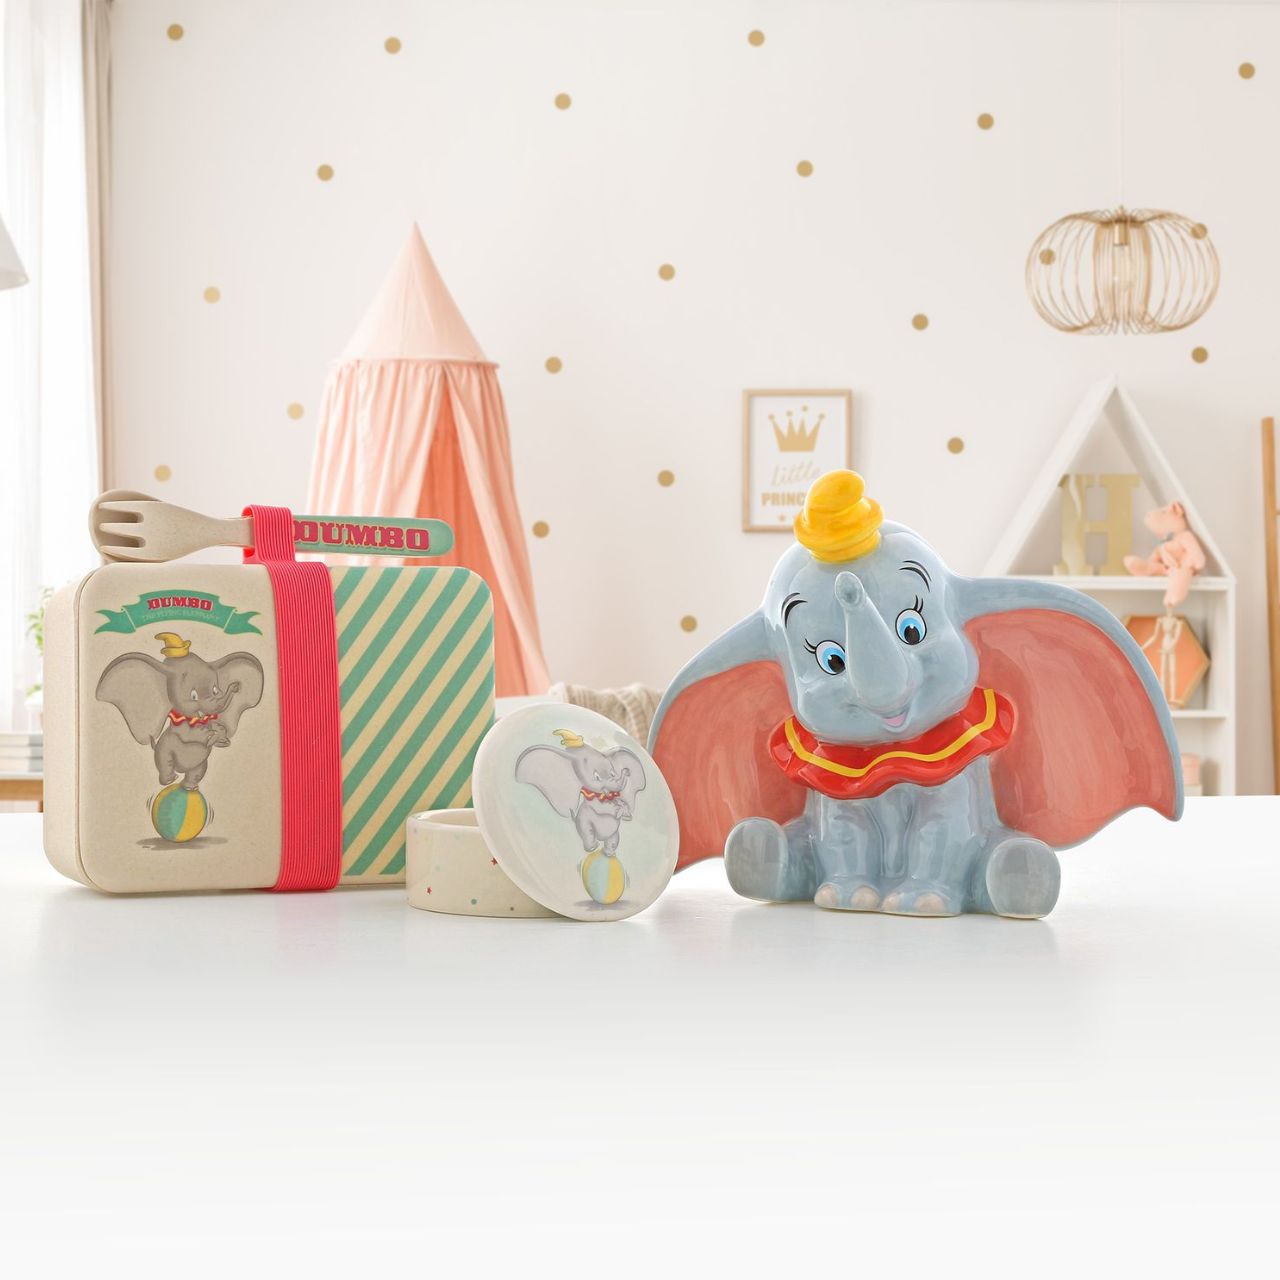 Enchanting Disney Collection Dumbo Money Bank  This delightful and charming Dumbo shaped money bank would make an ideal christening or new baby gift. Dumbo is featured with his famous, giant floppy ears.